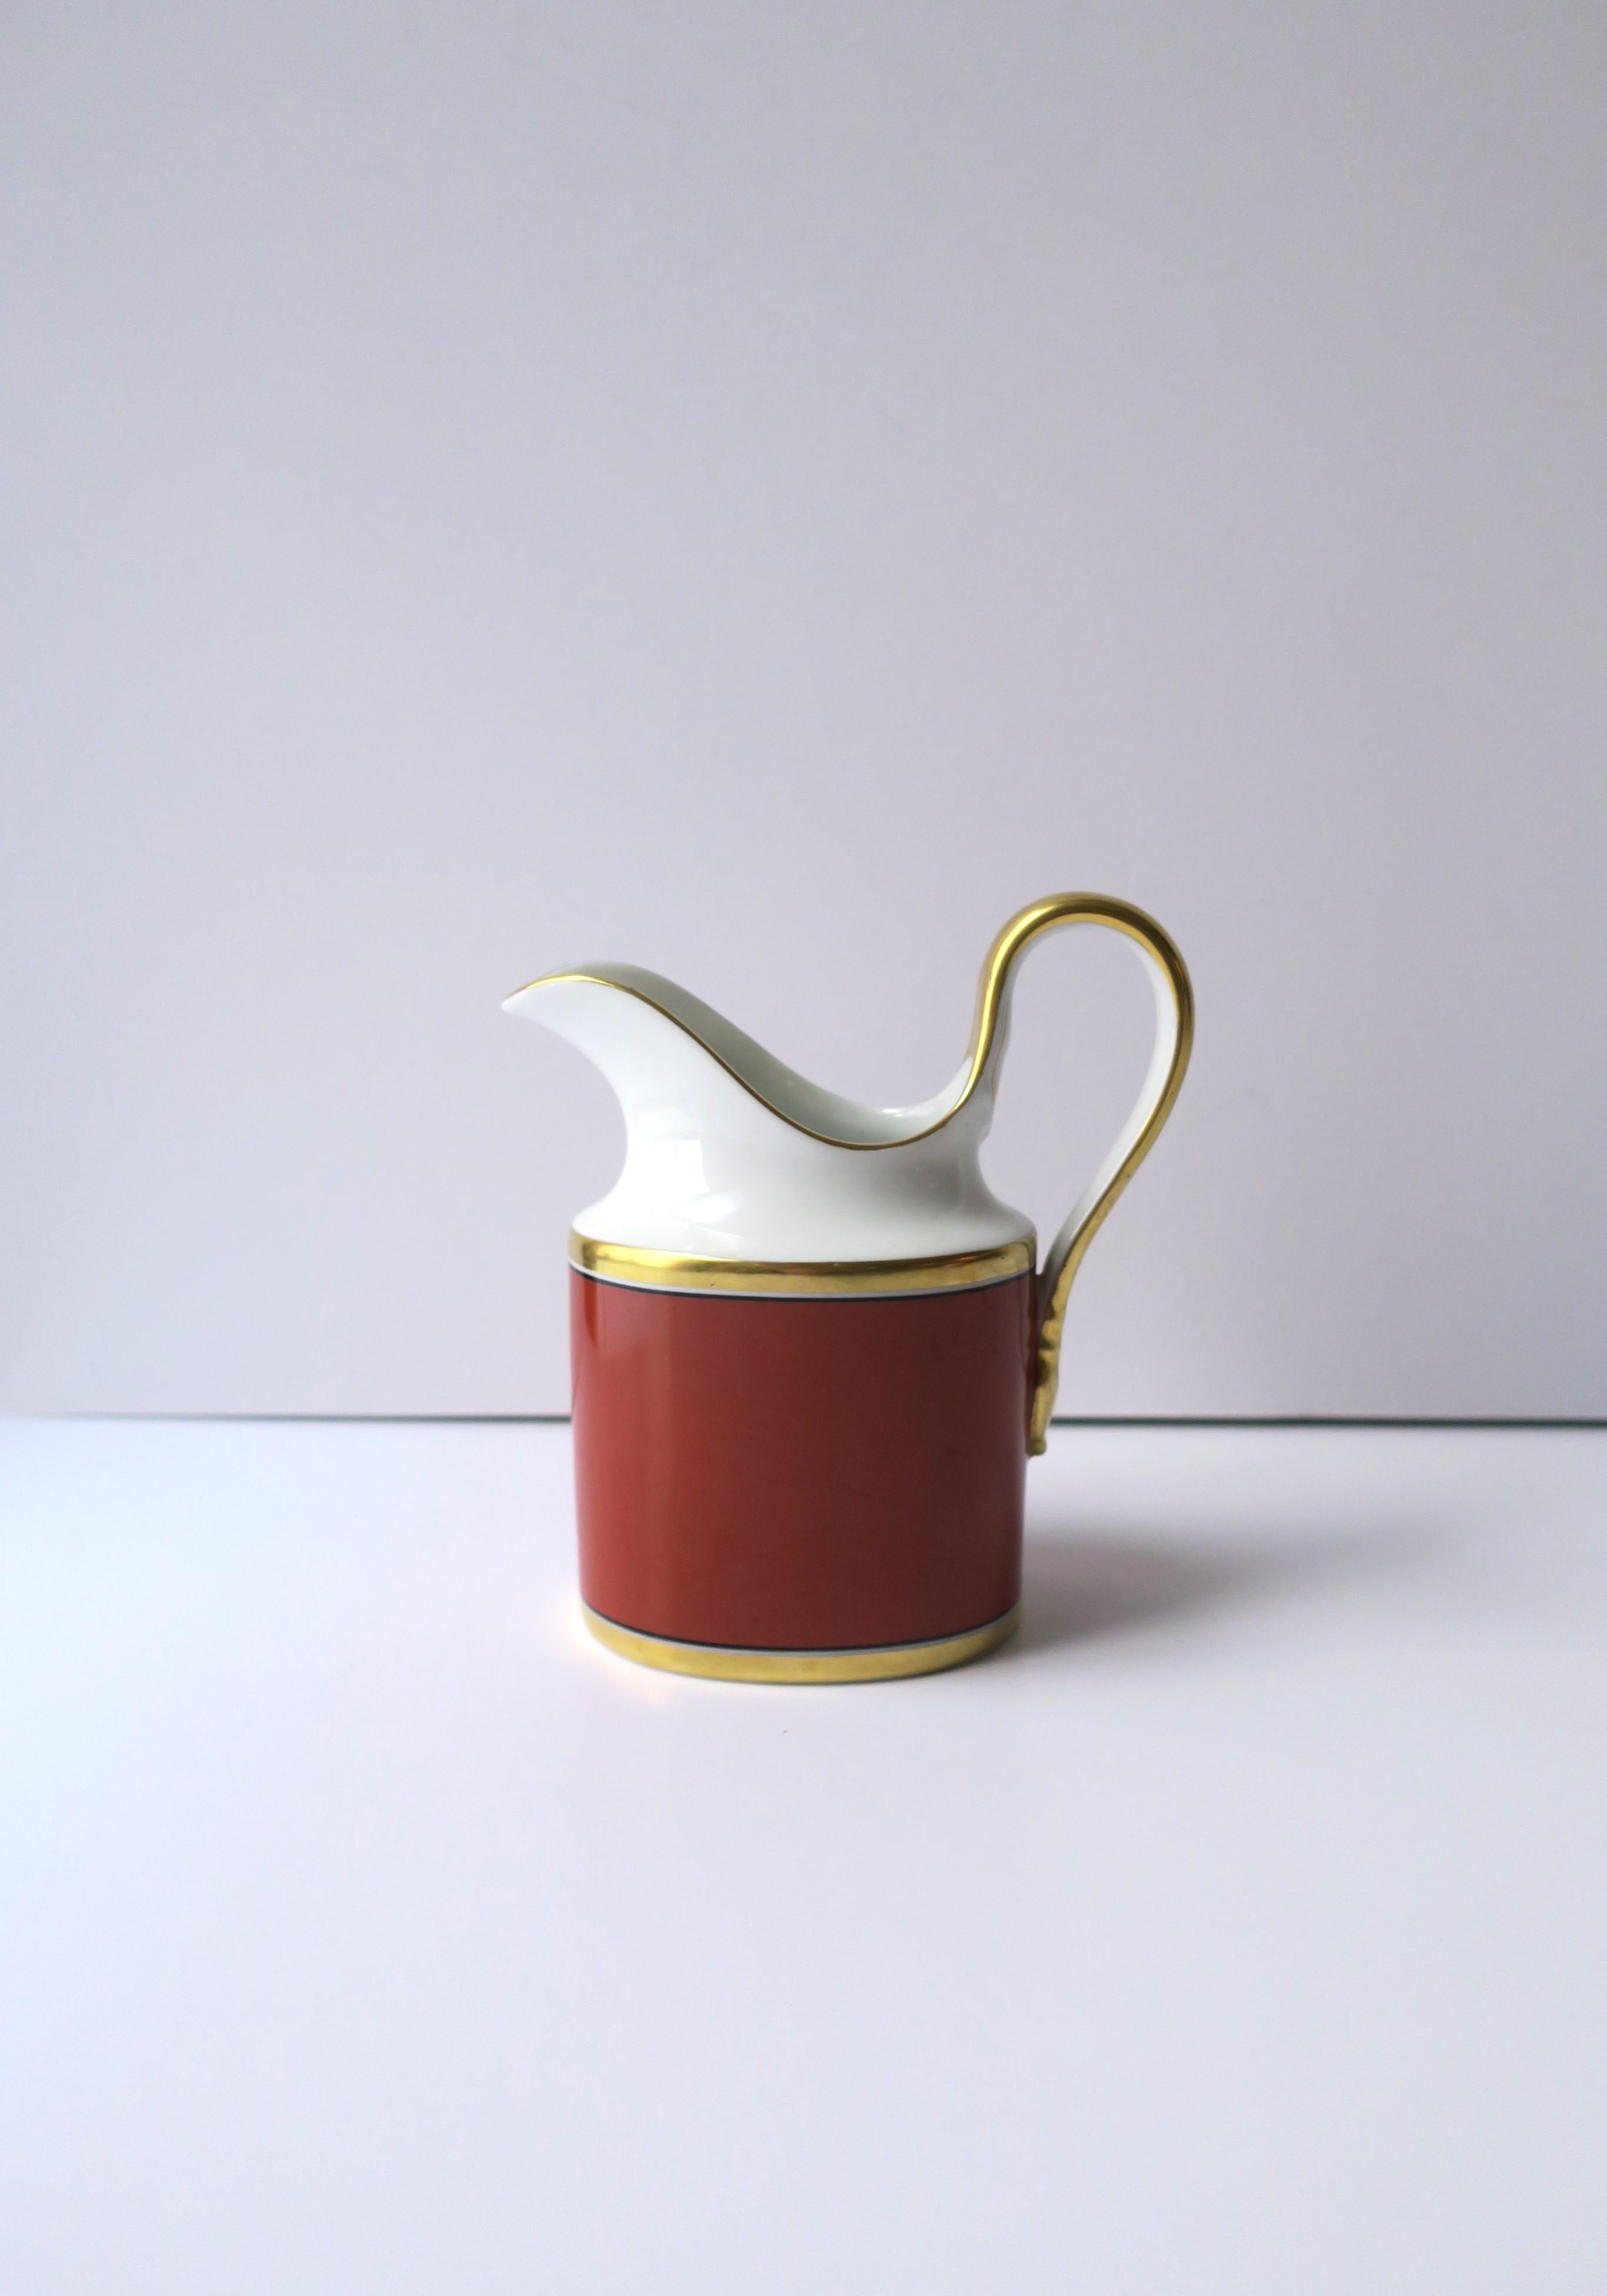 A vintage Italian Richard Ginori 'Contessa' gold and terracotta rust-red porcelain milk creamer pitcher, 1985, Italy. Piece is hand decorated with gold detail around rim, a gold band at center and base, and down handle. This 'Contessa' pattern is a